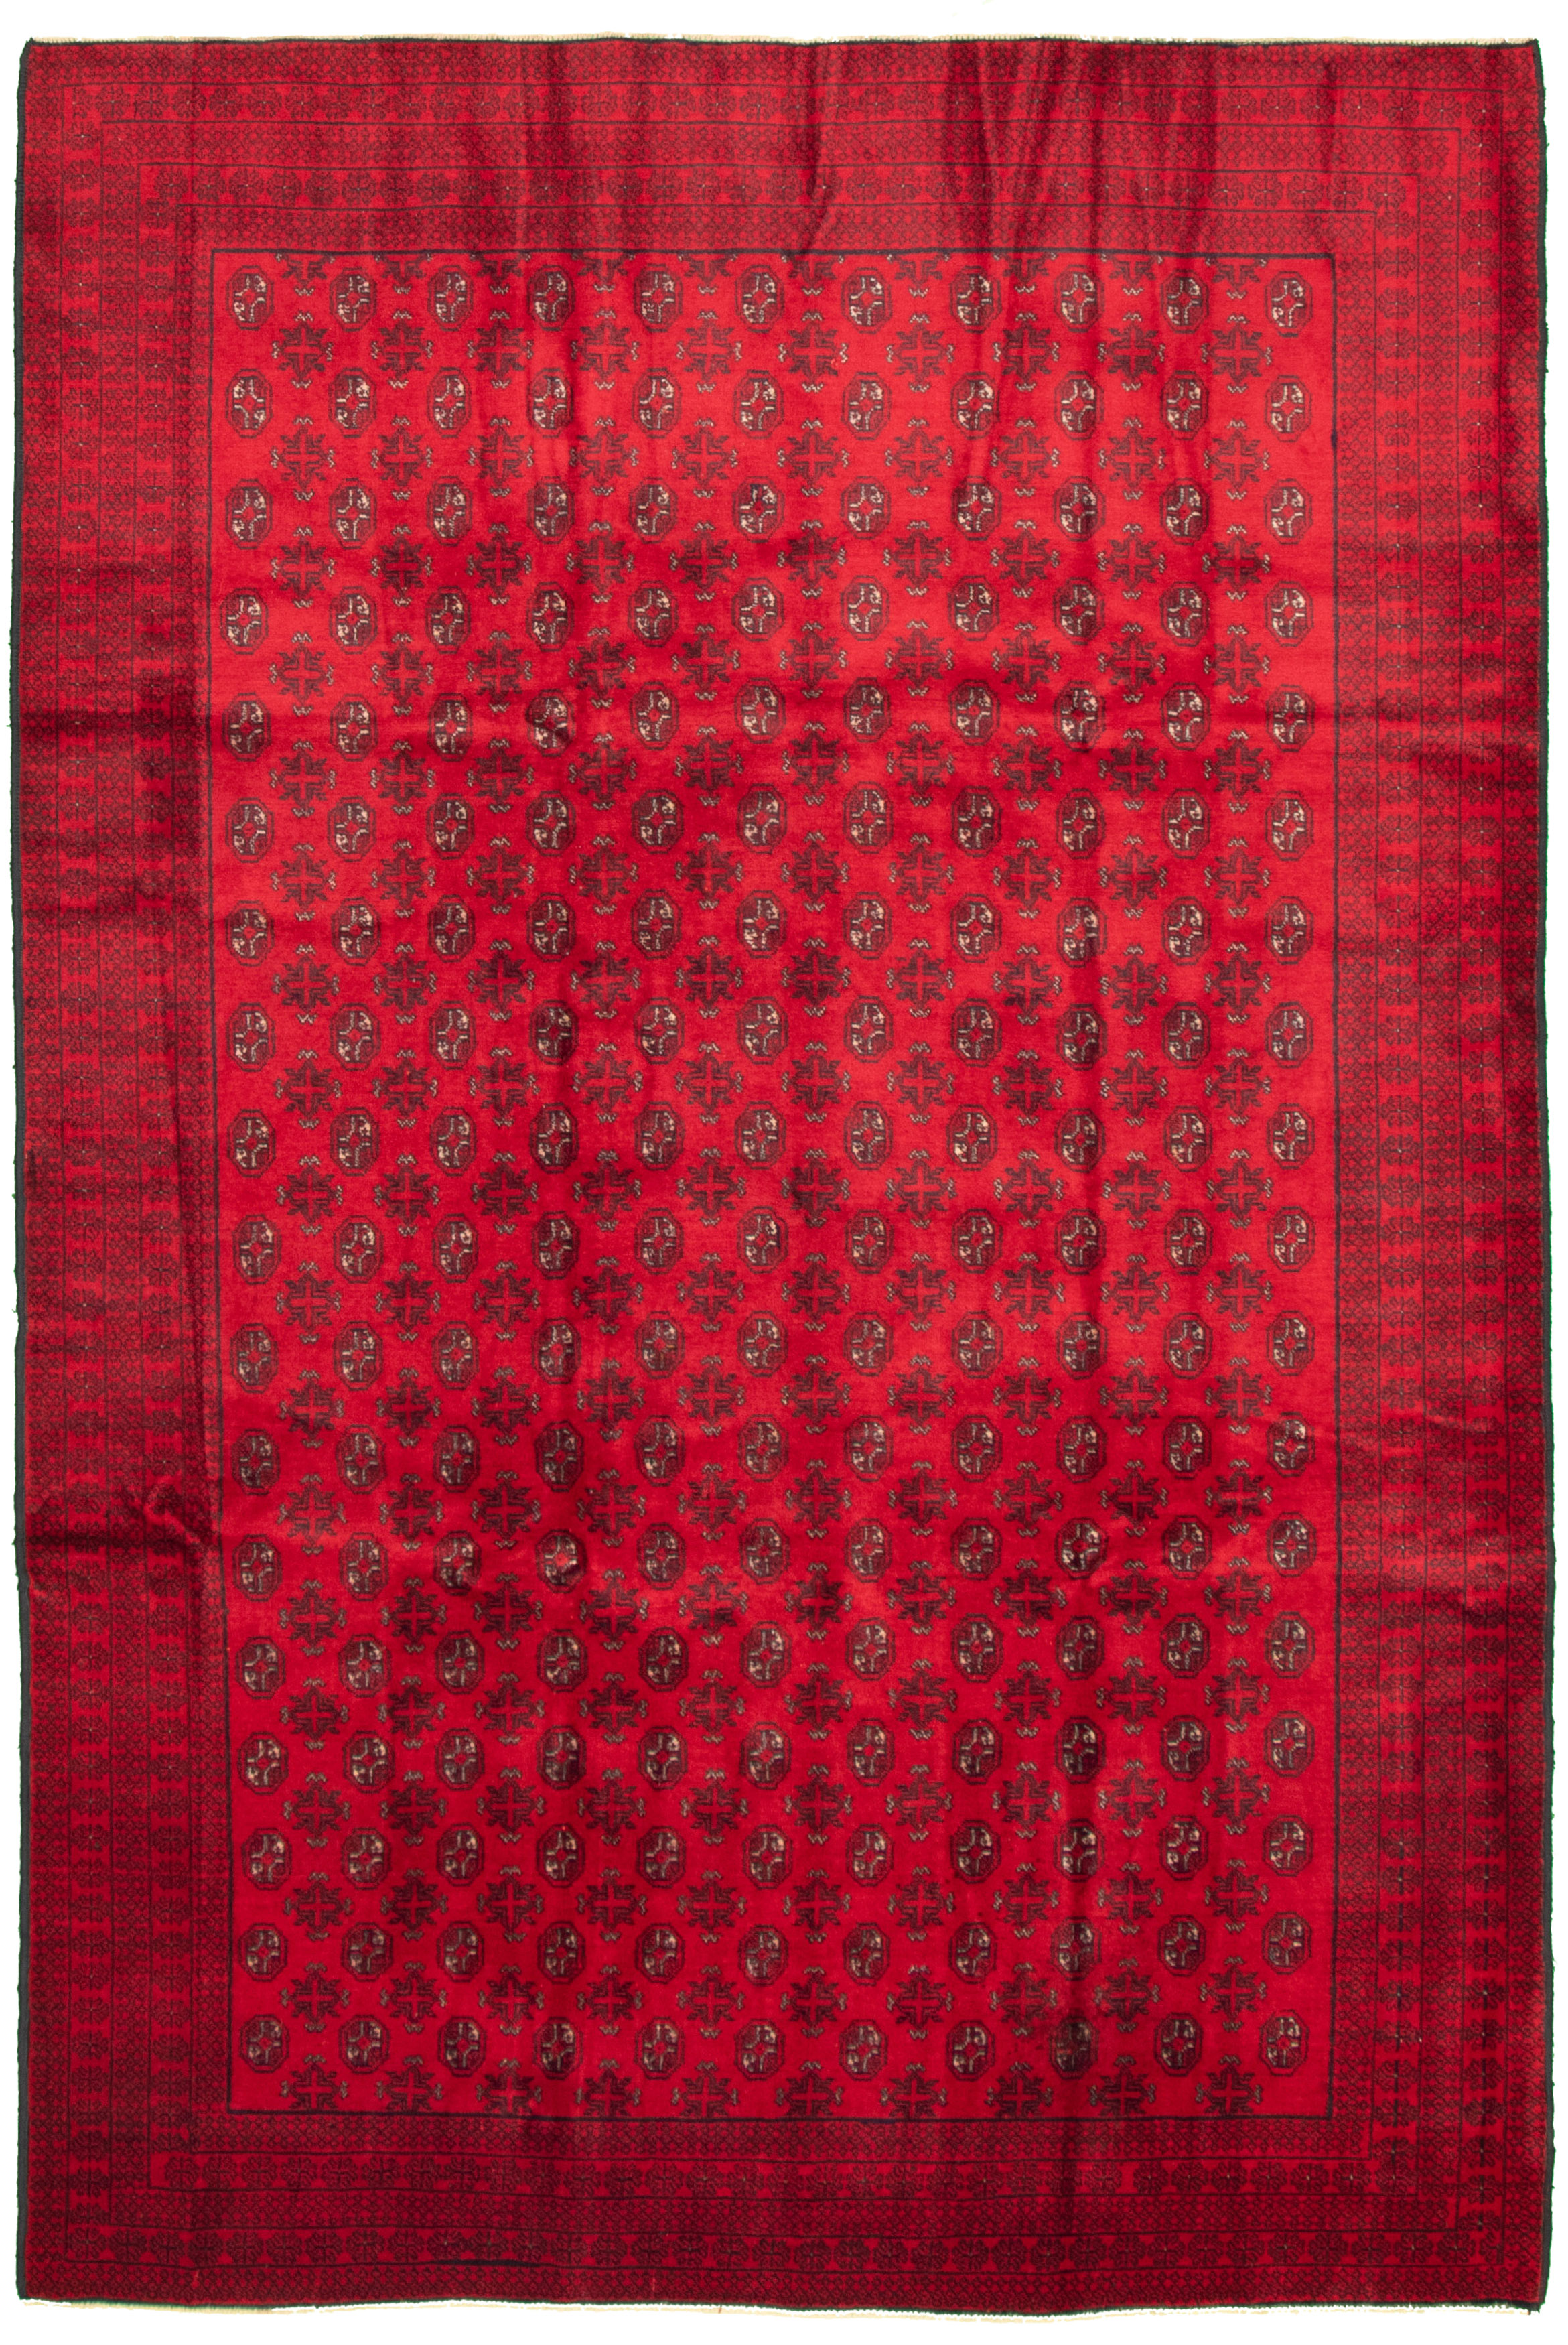 Hand-knotted Khal Mohammadi Red Wool Rug 6'3" x 9'5" Size: 6'3" x 9'5"  